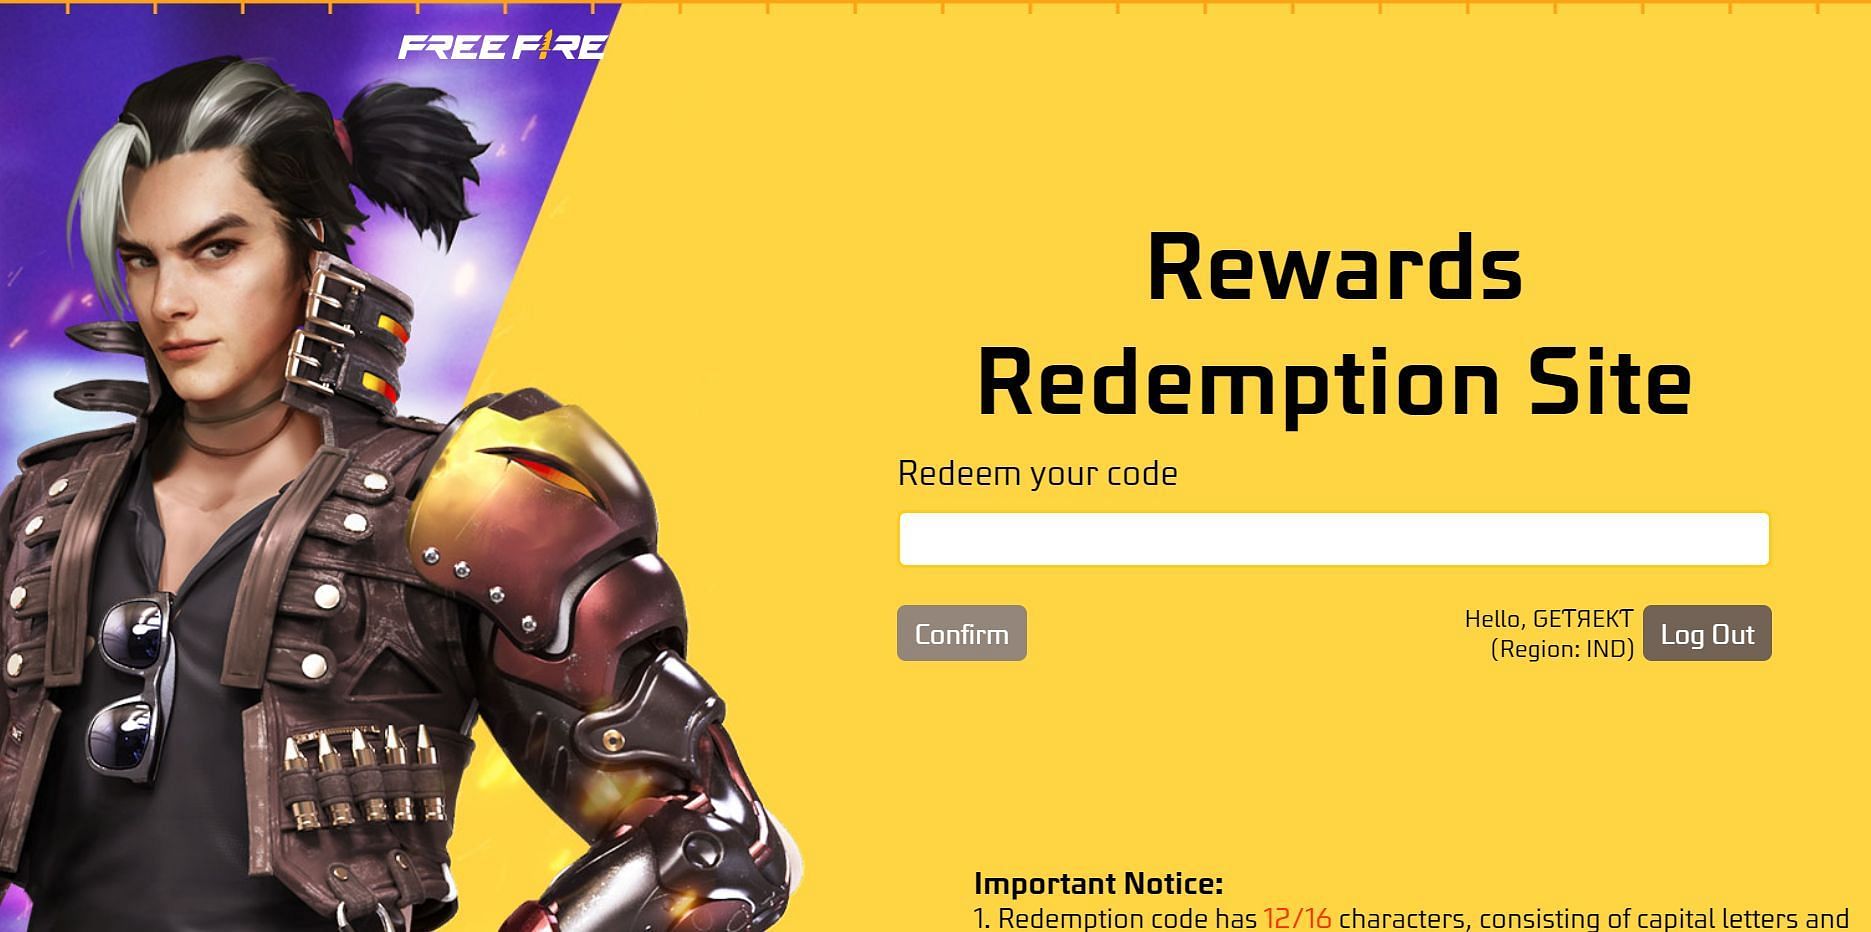 Enter the redeem code into the text box without any errors and then click Confirm (Image via Garena)